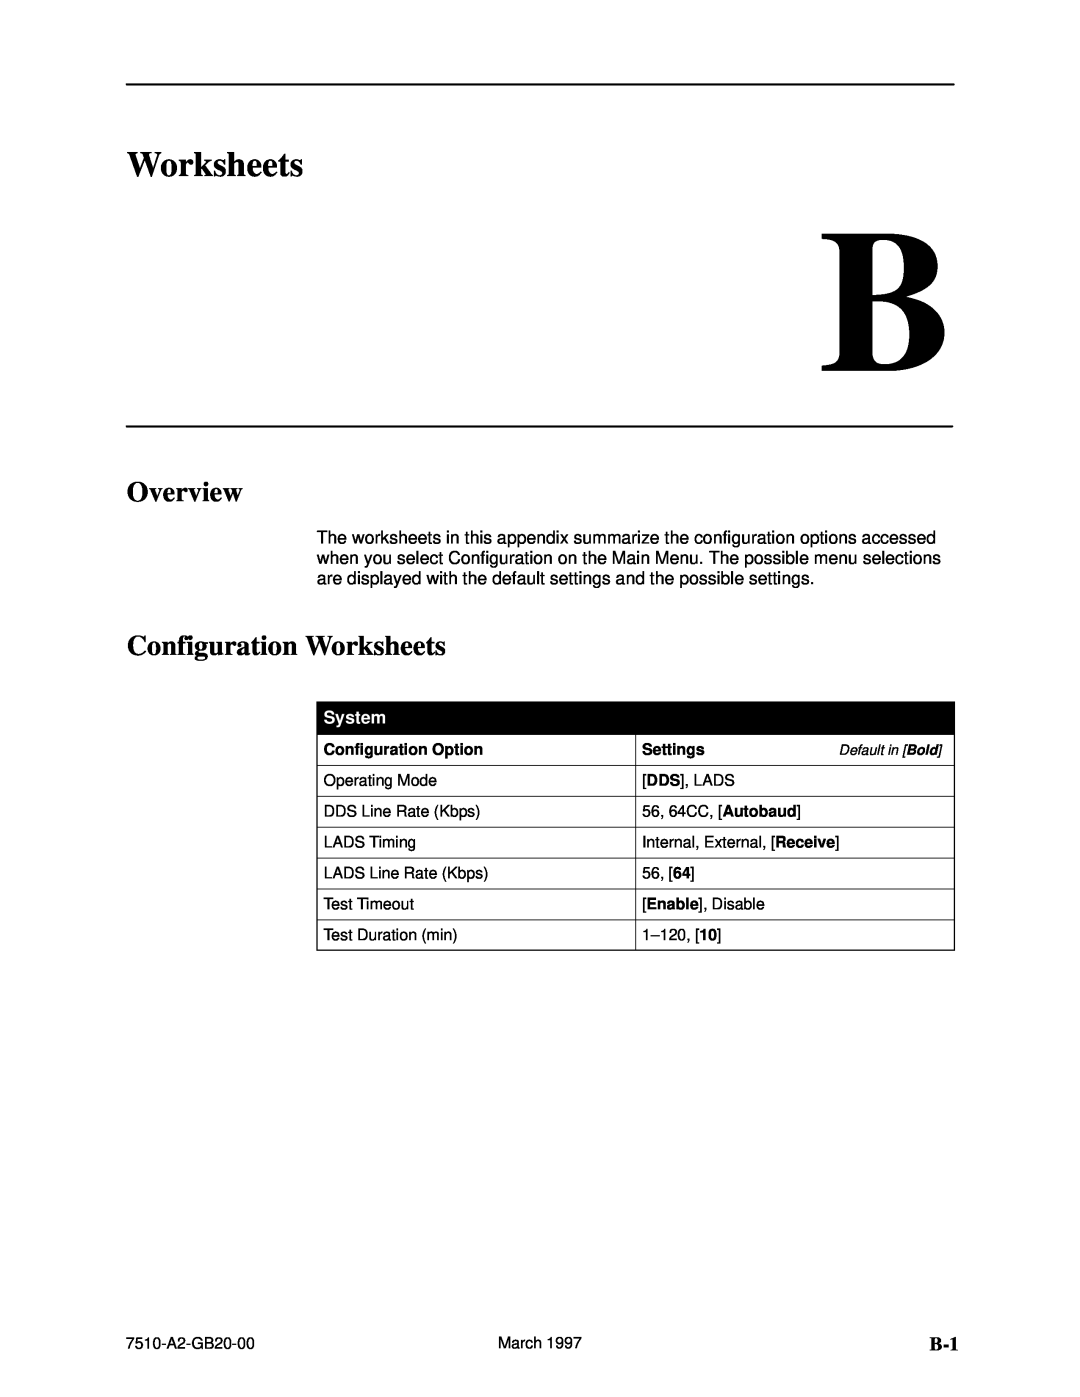 Paradyne 727 manual Overview, Configuration Worksheets, System 